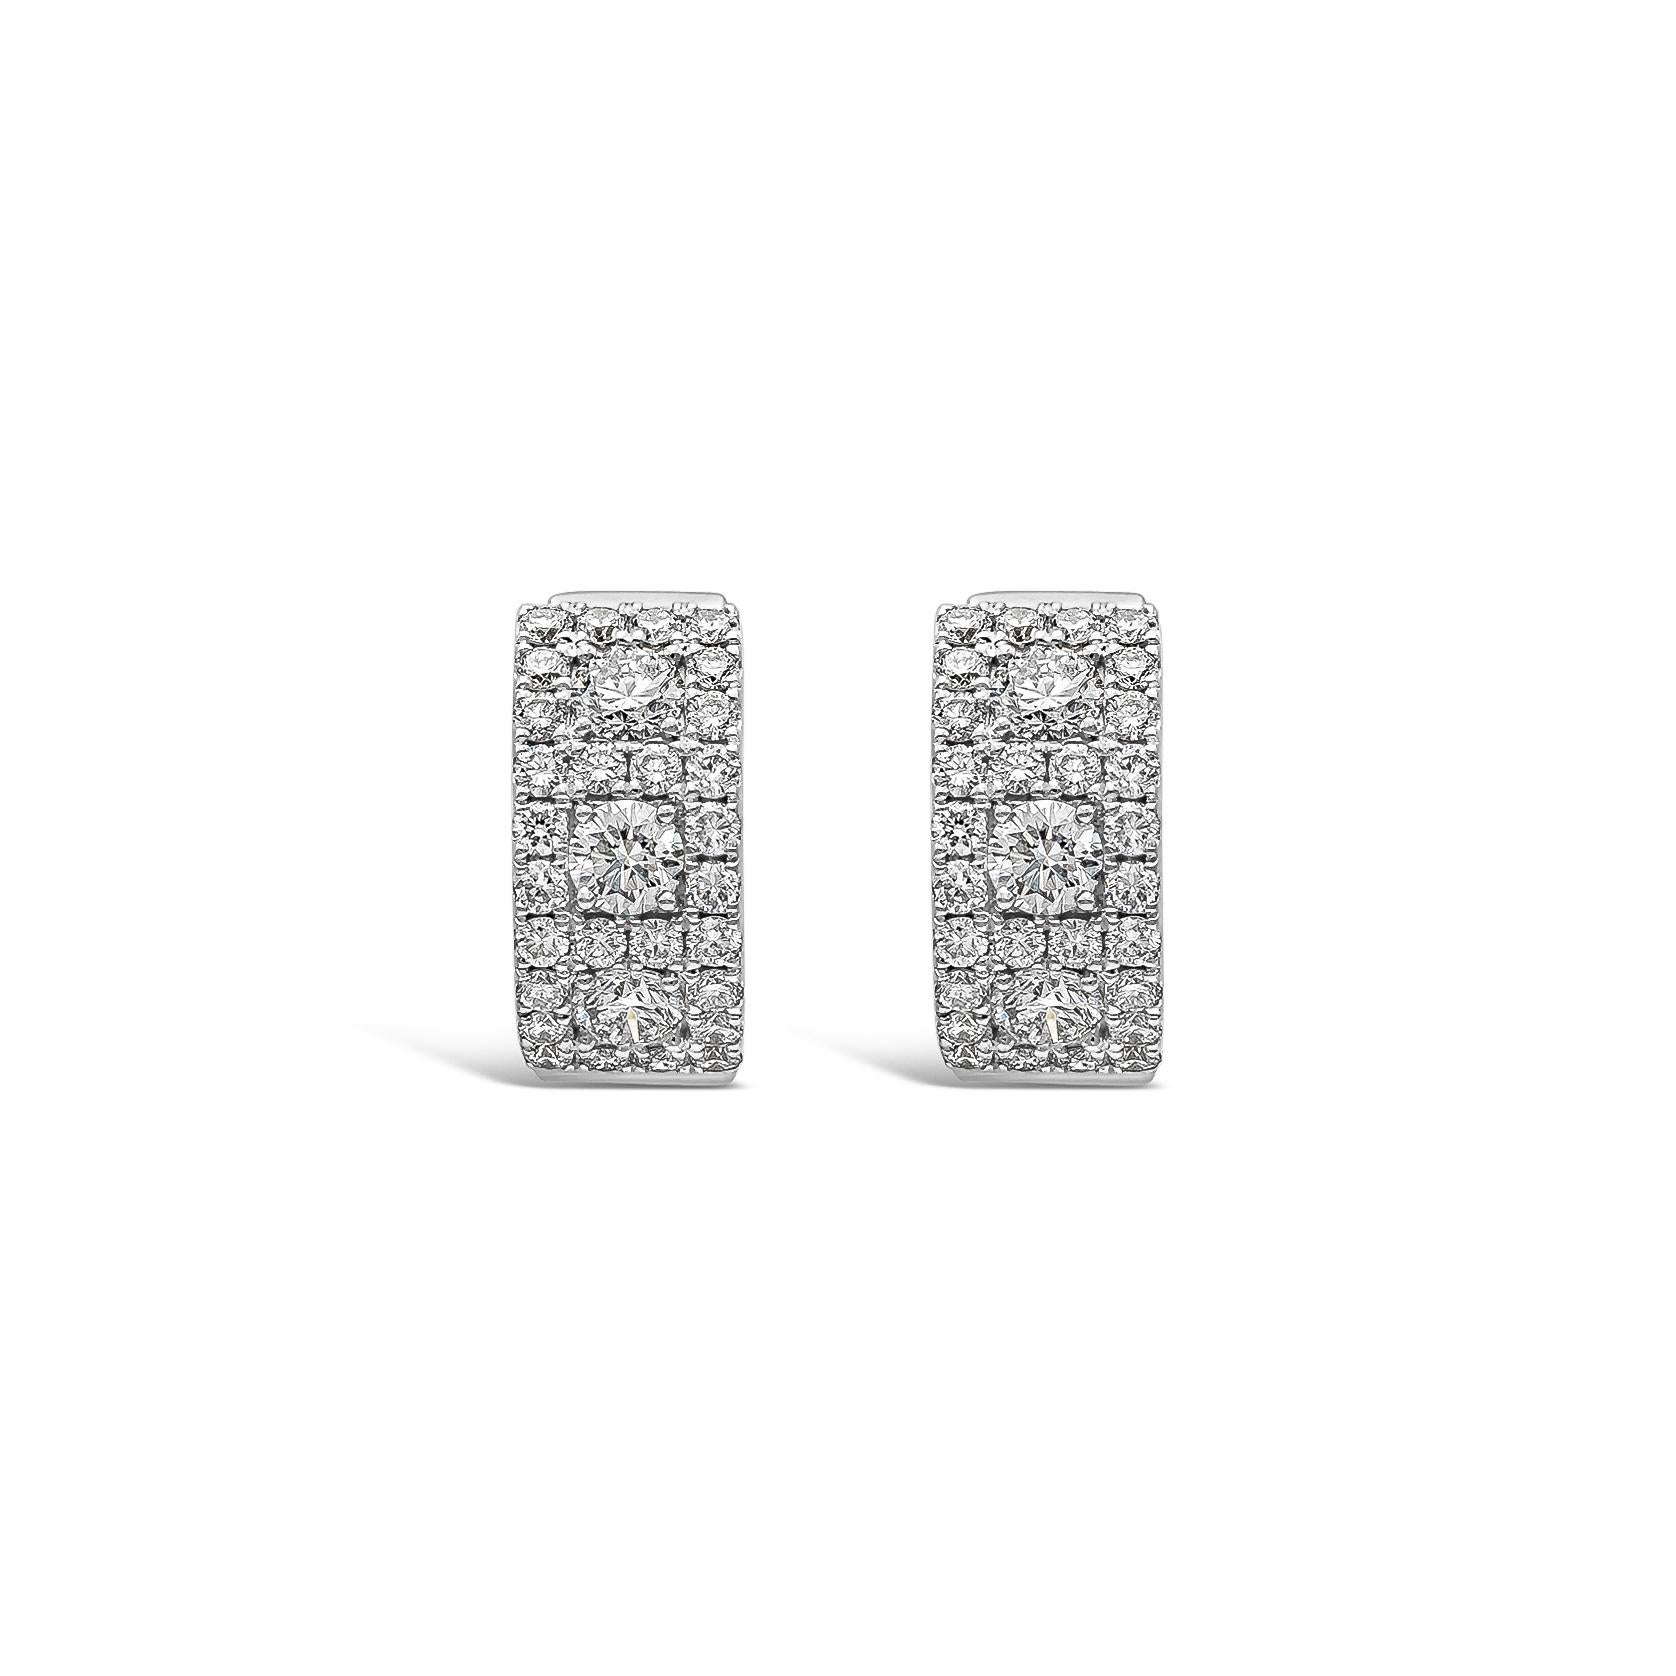 A stylish pair of huggie hoop earrings showcasing a row of round brilliant diamonds weighing 0.55 carats total, set in an 18k white gold setting. Accented with round melee diamonds weighing 0.60 carats total. Diamonds are approximately F color,